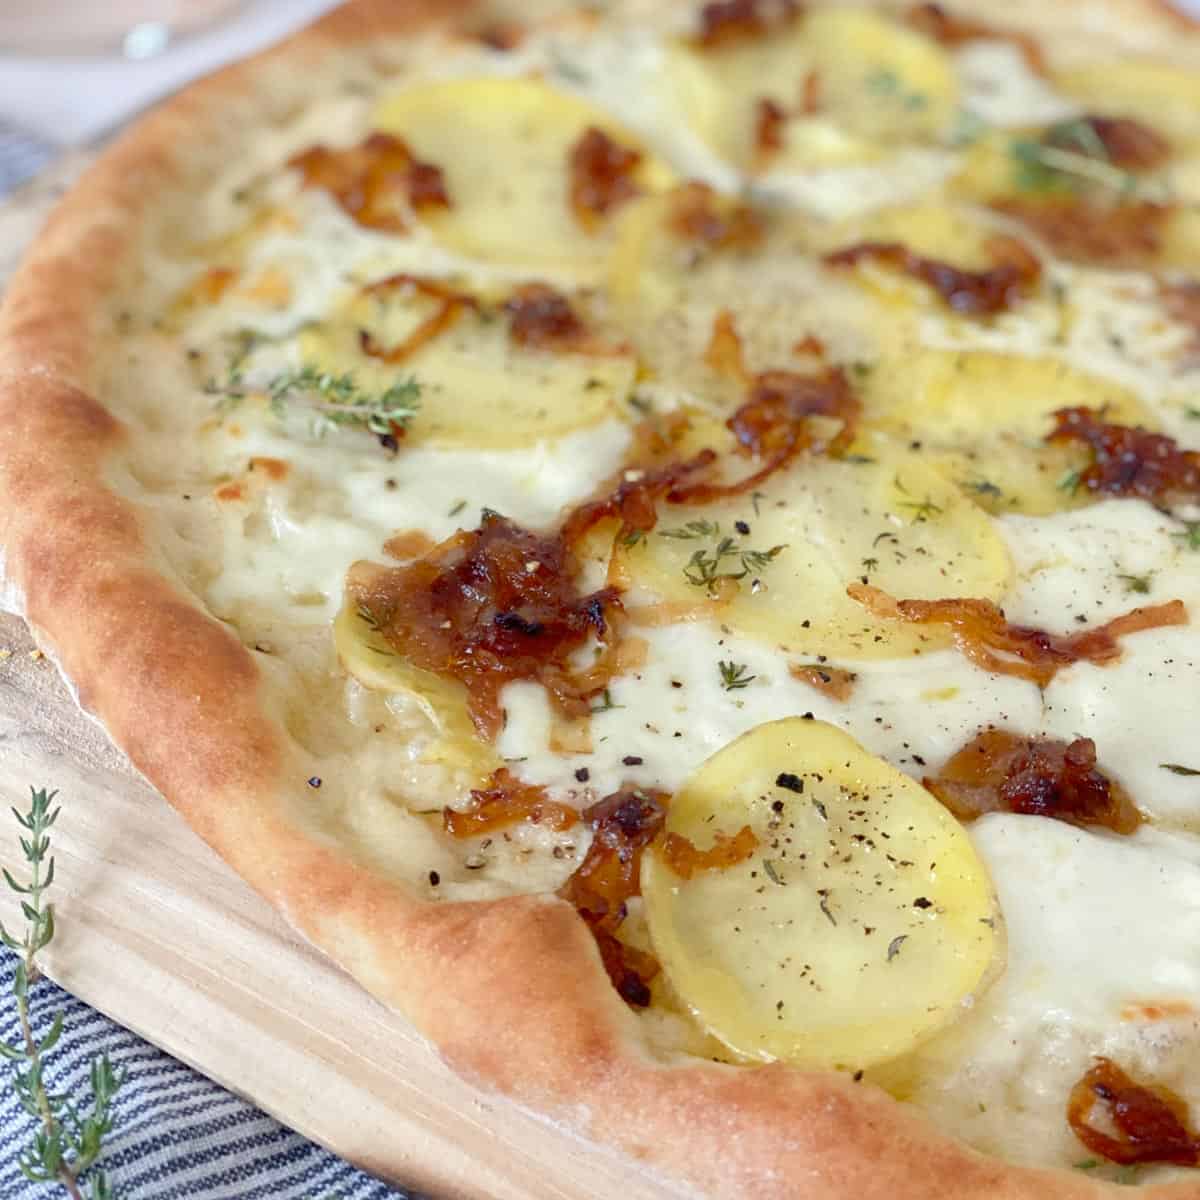 pizza topped with caramelized onions and yukon gold potatoes